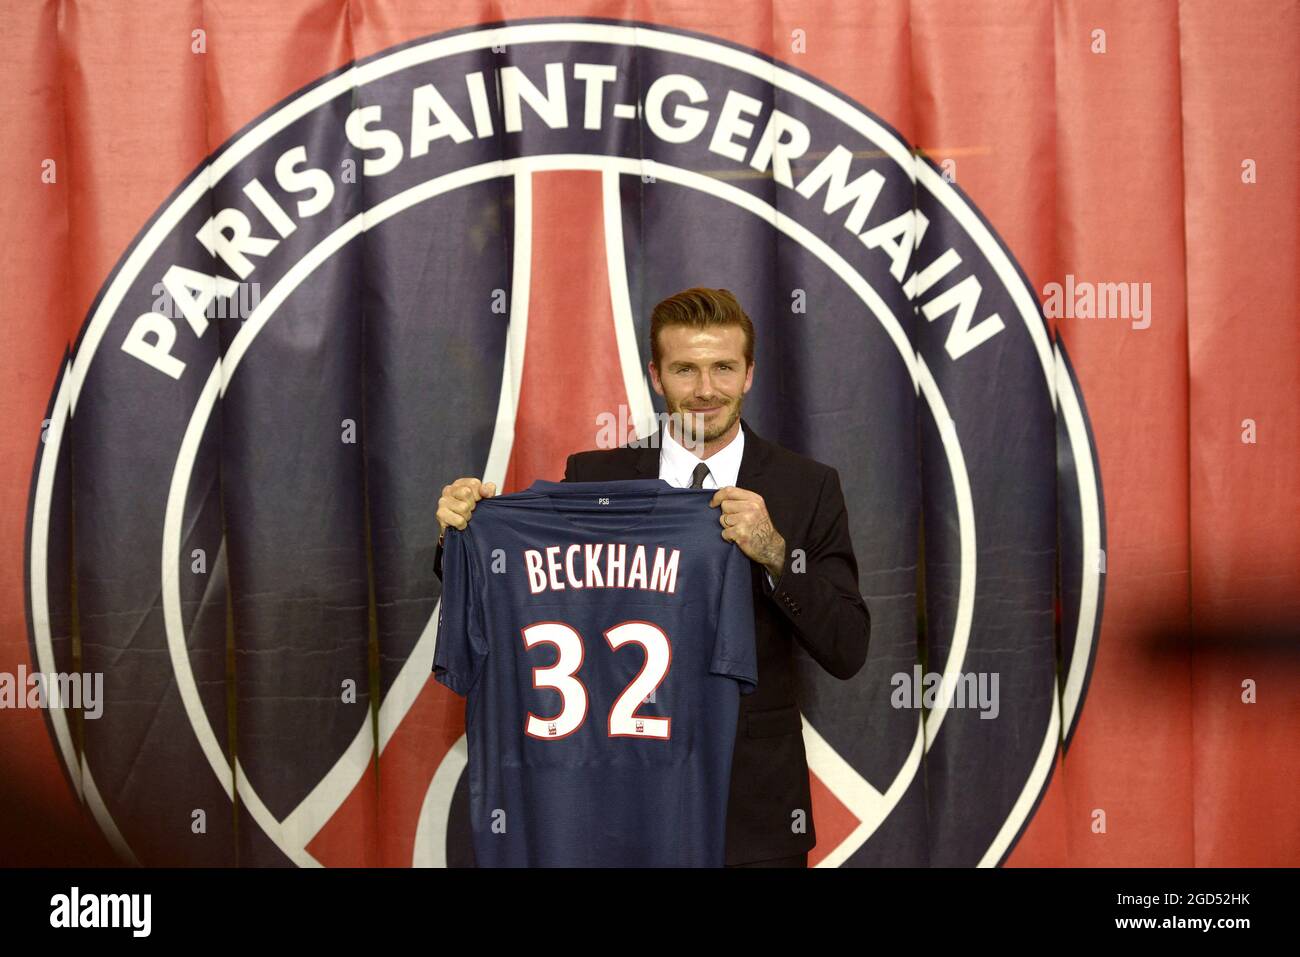 File photo dated January 31, 2013 of British and New PSG football player  David Beckham poses with his PSG Football shirt after his PSG signature at  the Parc des Princes stadium in